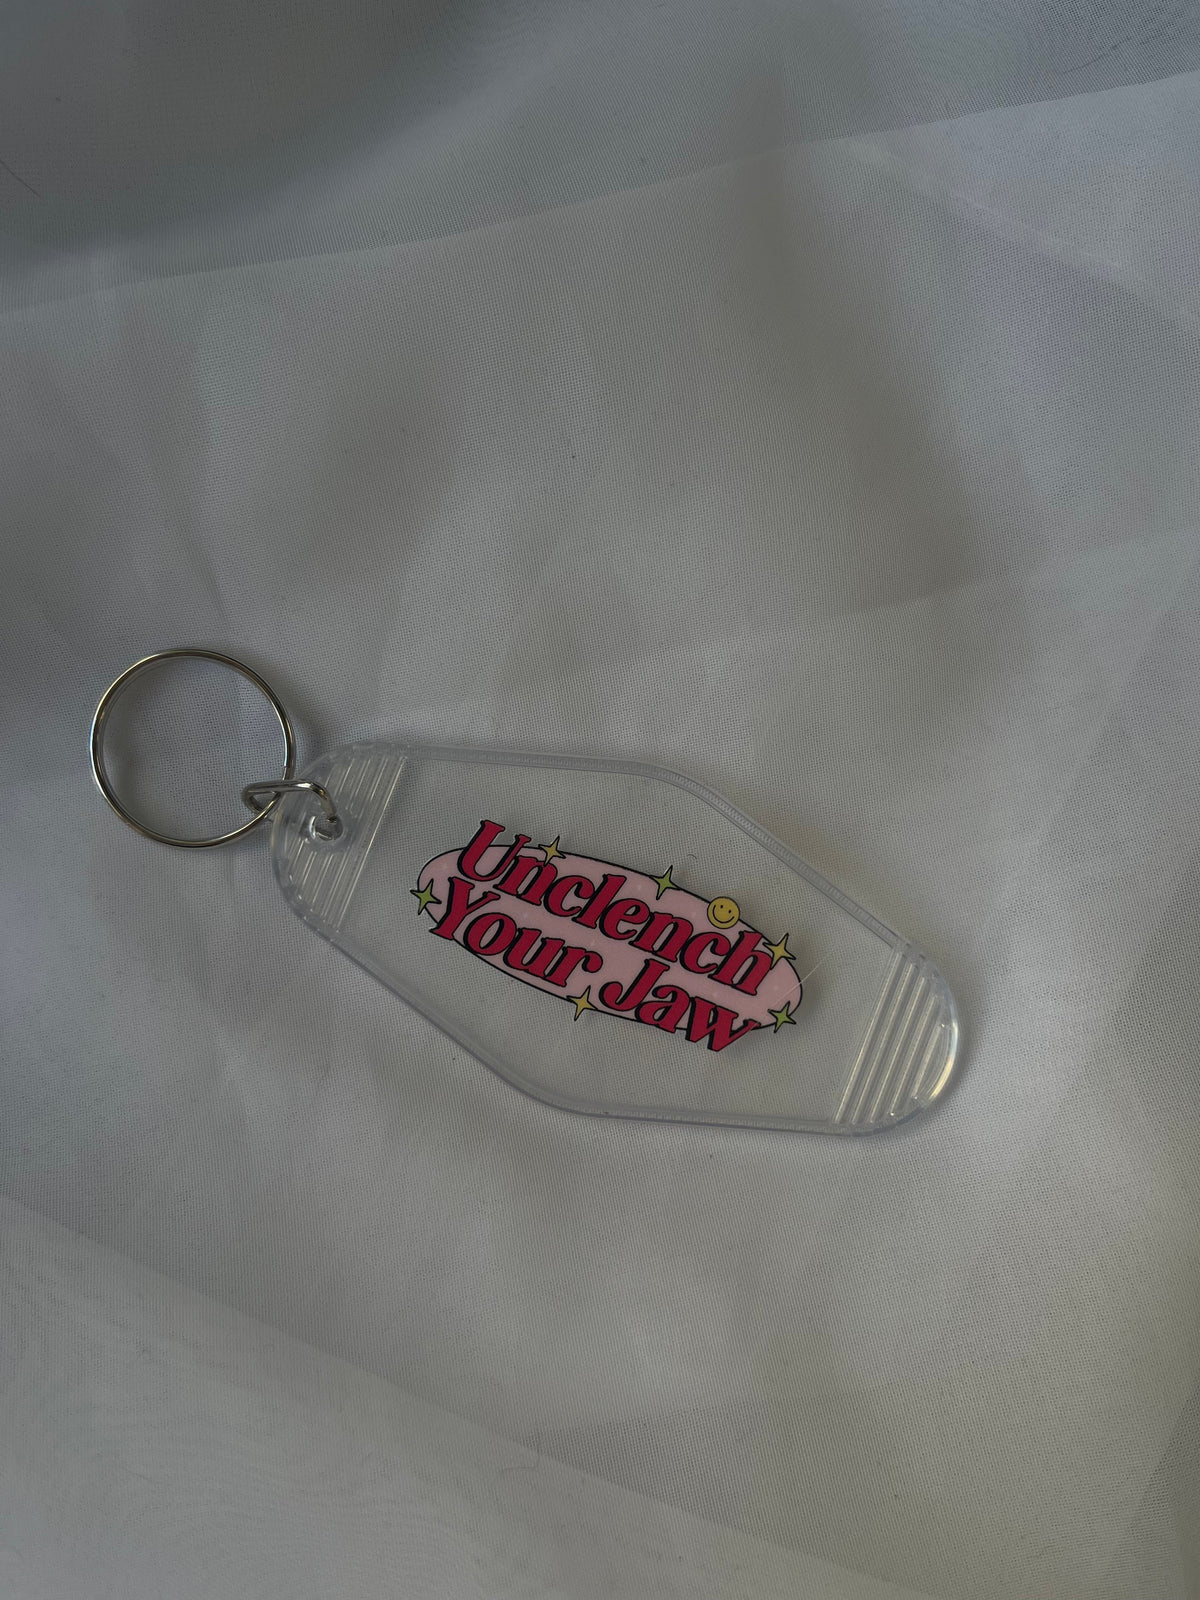 Unclench Your Jaw Motel Keychain